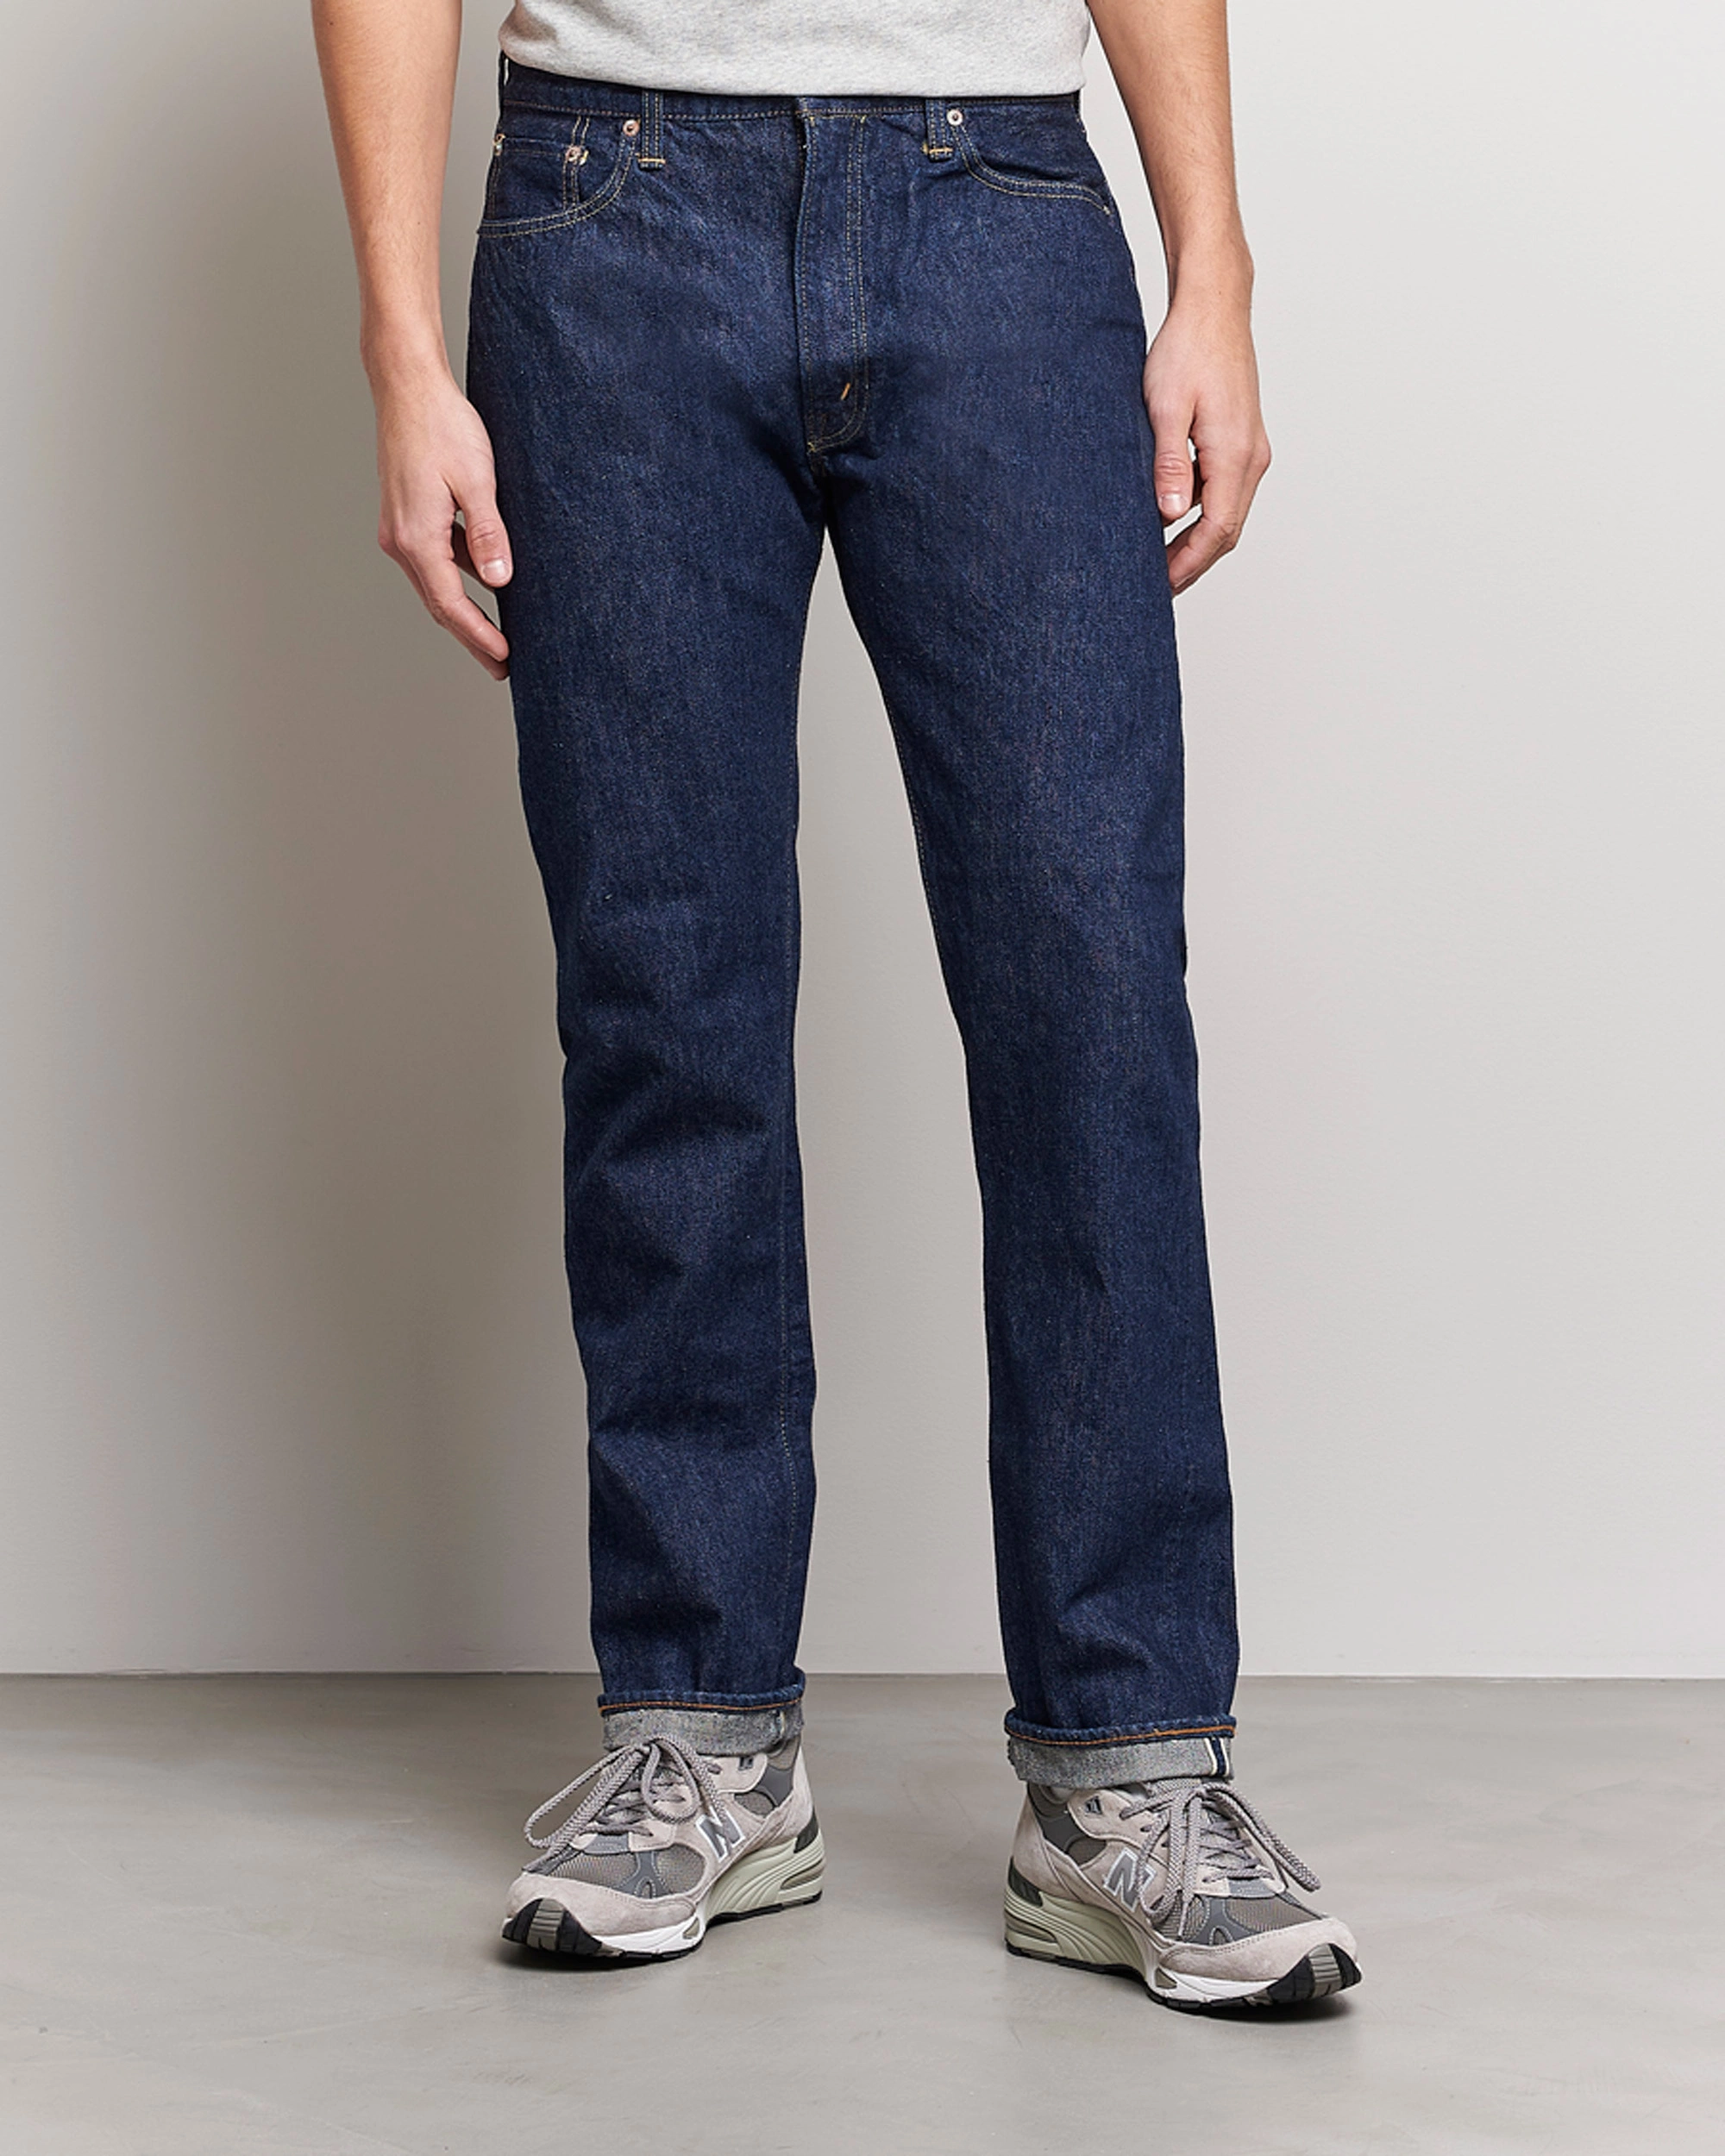 Mies | Straight leg | orSlow | Tapered Fit 107 Selvedge Jeans One Wash